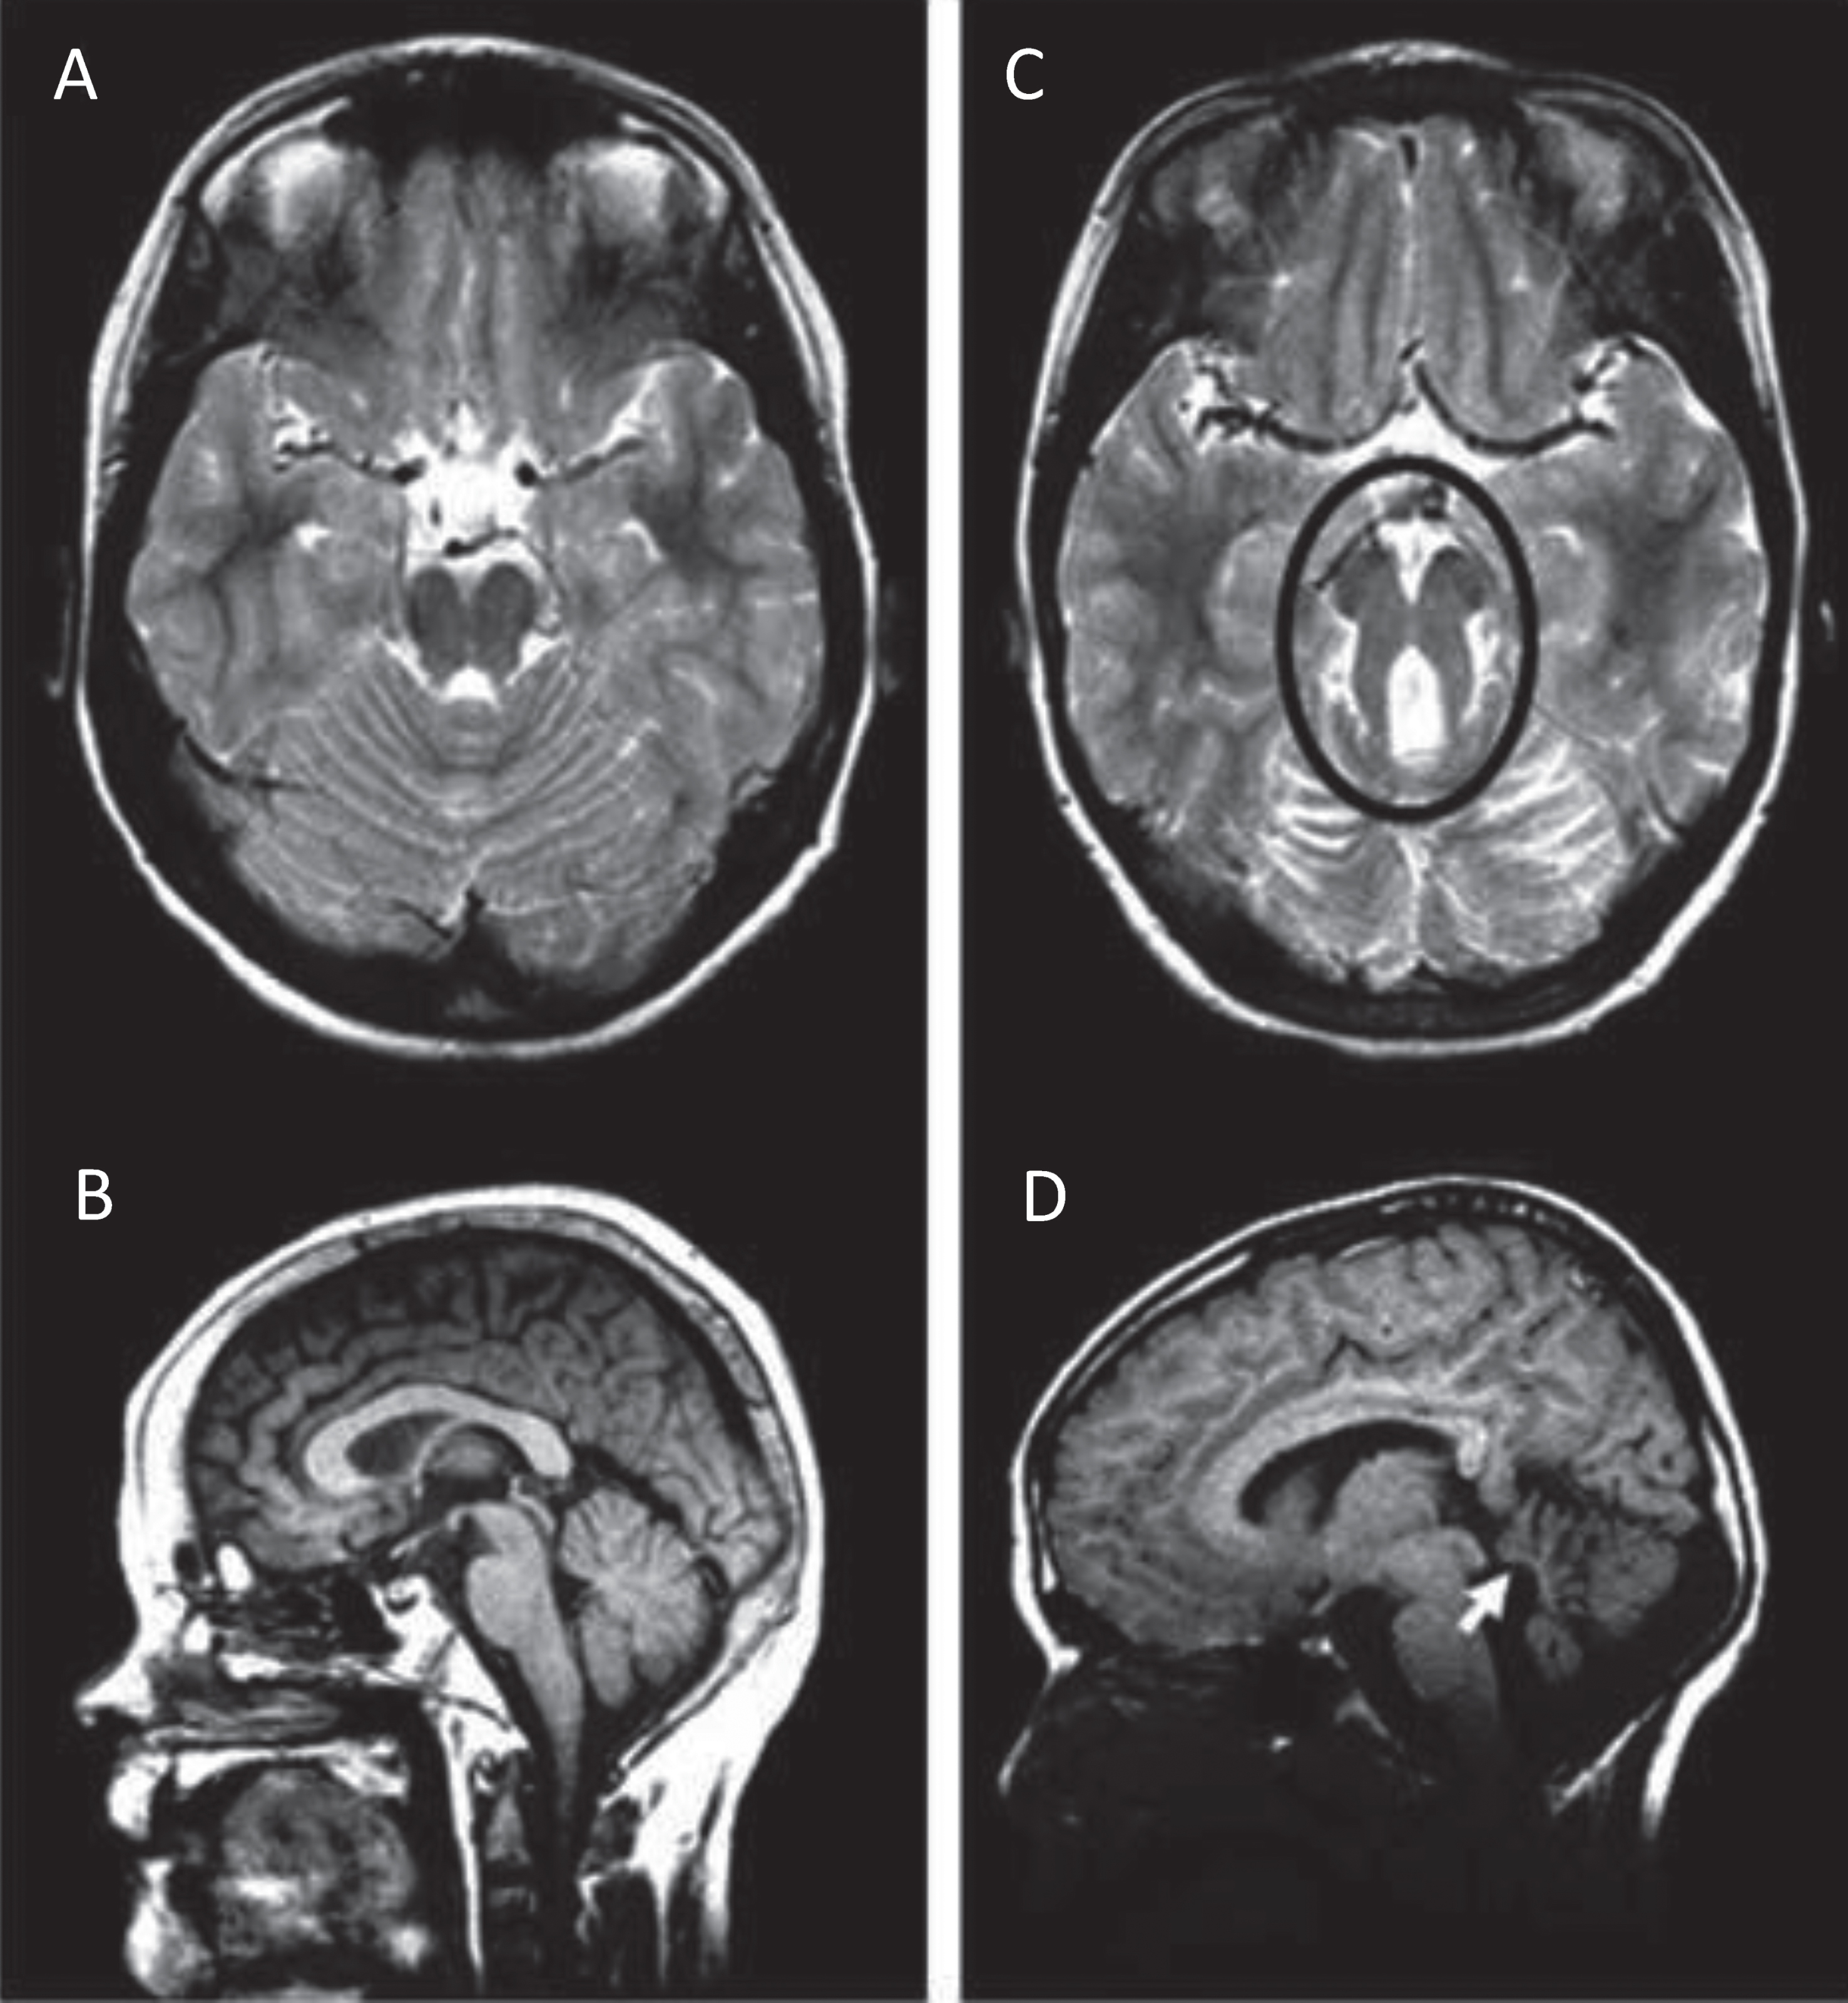 Molar Tooth Sign in Joubert syndrome. T2-weighted MRI images on axial view (A) and mid-sagittal view (B) through the cerebellum and brainstem of a normal individual showing intact cerebellar vermis. T2-weighted MRI image on axial view (C) and mid-sagittal view (D) through the cerebellum and brainstem of a child with JS. The Molar Tooth Sign is circled in black, with rostral shifting or elevation of the roof (fastigium) of the fourth ventricle and vermis hypoplasia (white arrow).